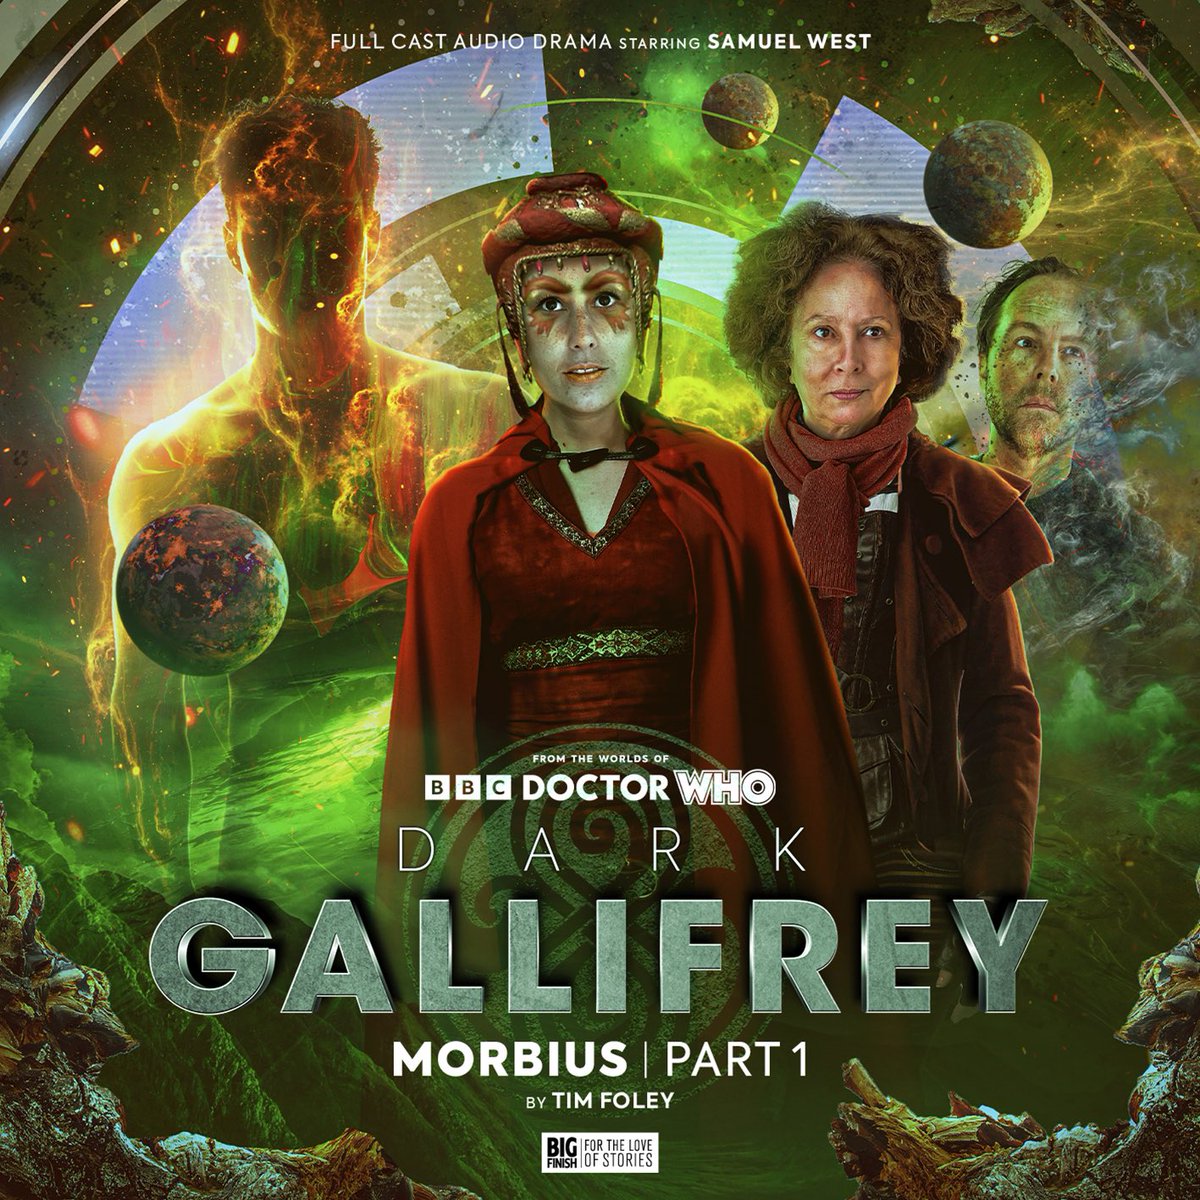 🚨 OUT NOW - Return to world of the Time Lords with #DoctorWho: Dark Gallifrey! Dark forces are lurking in the hold of a Time Lord battleship, this voyage home won't be easy... Morbius: Part 1, by Tim Foley is out now from @bigfinish!